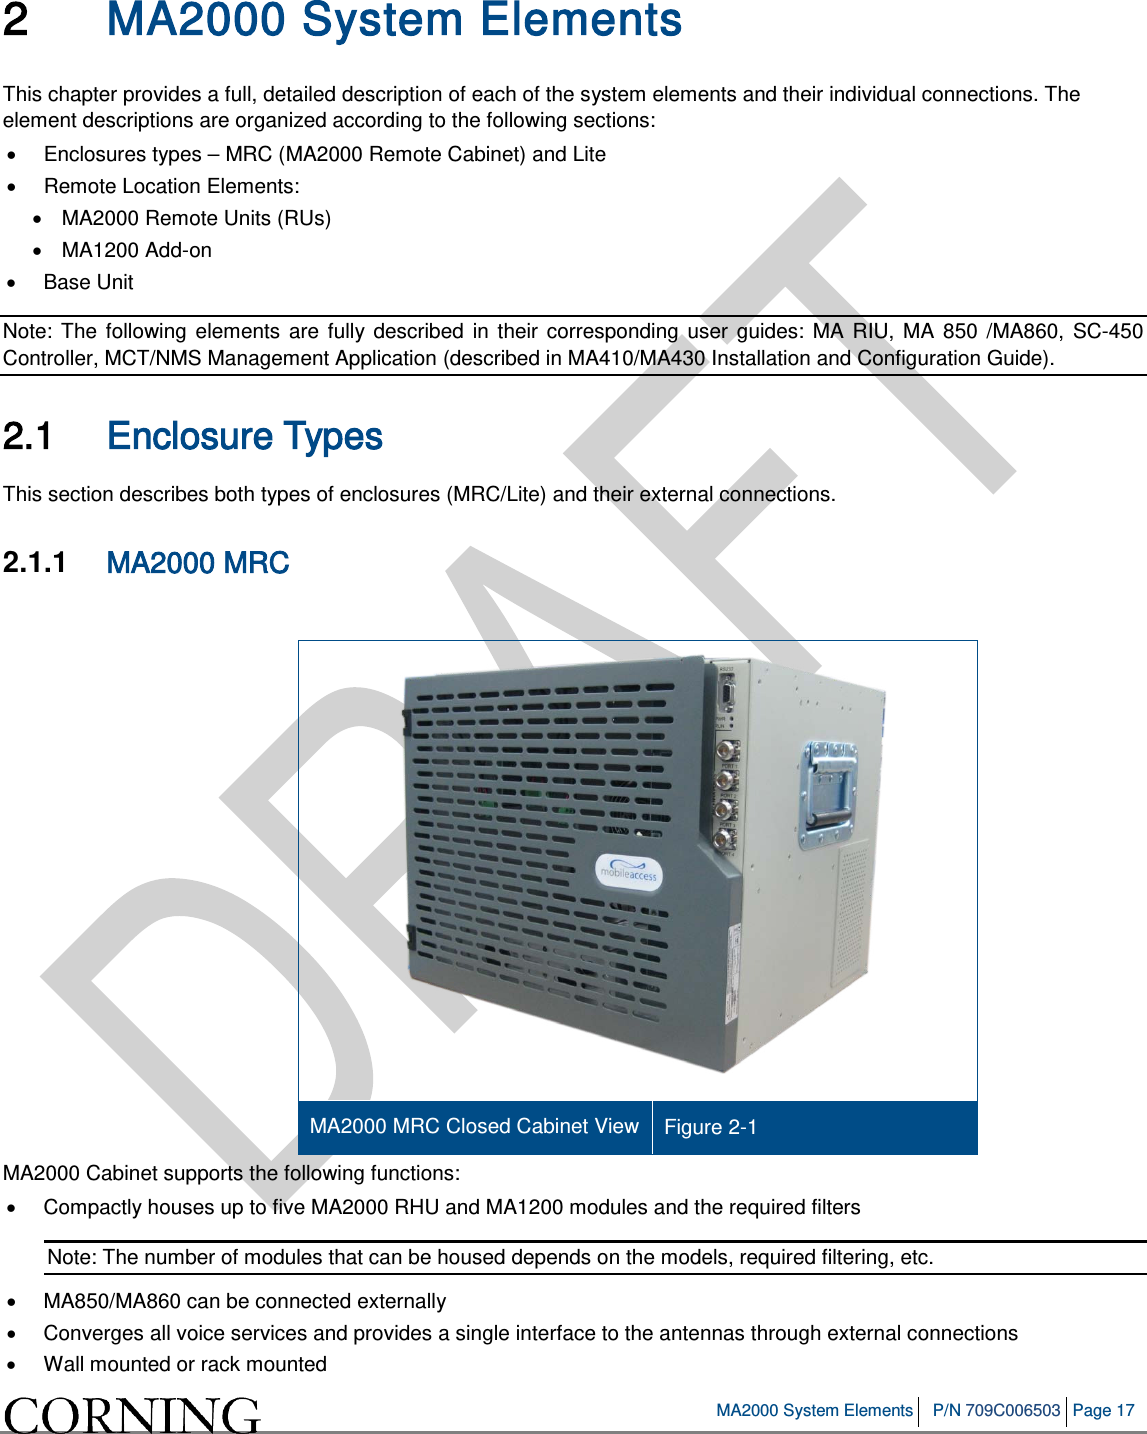   MA2000 System Elements P/N 709C006503 Page 17   2 MA2000 System Elements This chapter provides a full, detailed description of each of the system elements and their individual connections. The element descriptions are organized according to the following sections: •  Enclosures types – MRC (MA2000 Remote Cabinet) and Lite  • Remote Location Elements: • MA2000 Remote Units (RUs) • MA1200 Add-on • Base Unit Note: The following elements are fully described in their corresponding user guides: MA RIU, MA 850 /MA860, SC-450 Controller, MCT/NMS Management Application (described in MA410/MA430 Installation and Configuration Guide). 2.1 Enclosure Types This section describes both types of enclosures (MRC/Lite) and their external connections. 2.1.1  MA2000 MRC    MA2000 MRC Closed Cabinet View Figure  2-1 MA2000 Cabinet supports the following functions: • Compactly houses up to five MA2000 RHU and MA1200 modules and the required filters Note: The number of modules that can be housed depends on the models, required filtering, etc. • MA850/MA860 can be connected externally • Converges all voice services and provides a single interface to the antennas through external connections • Wall mounted or rack mounted 